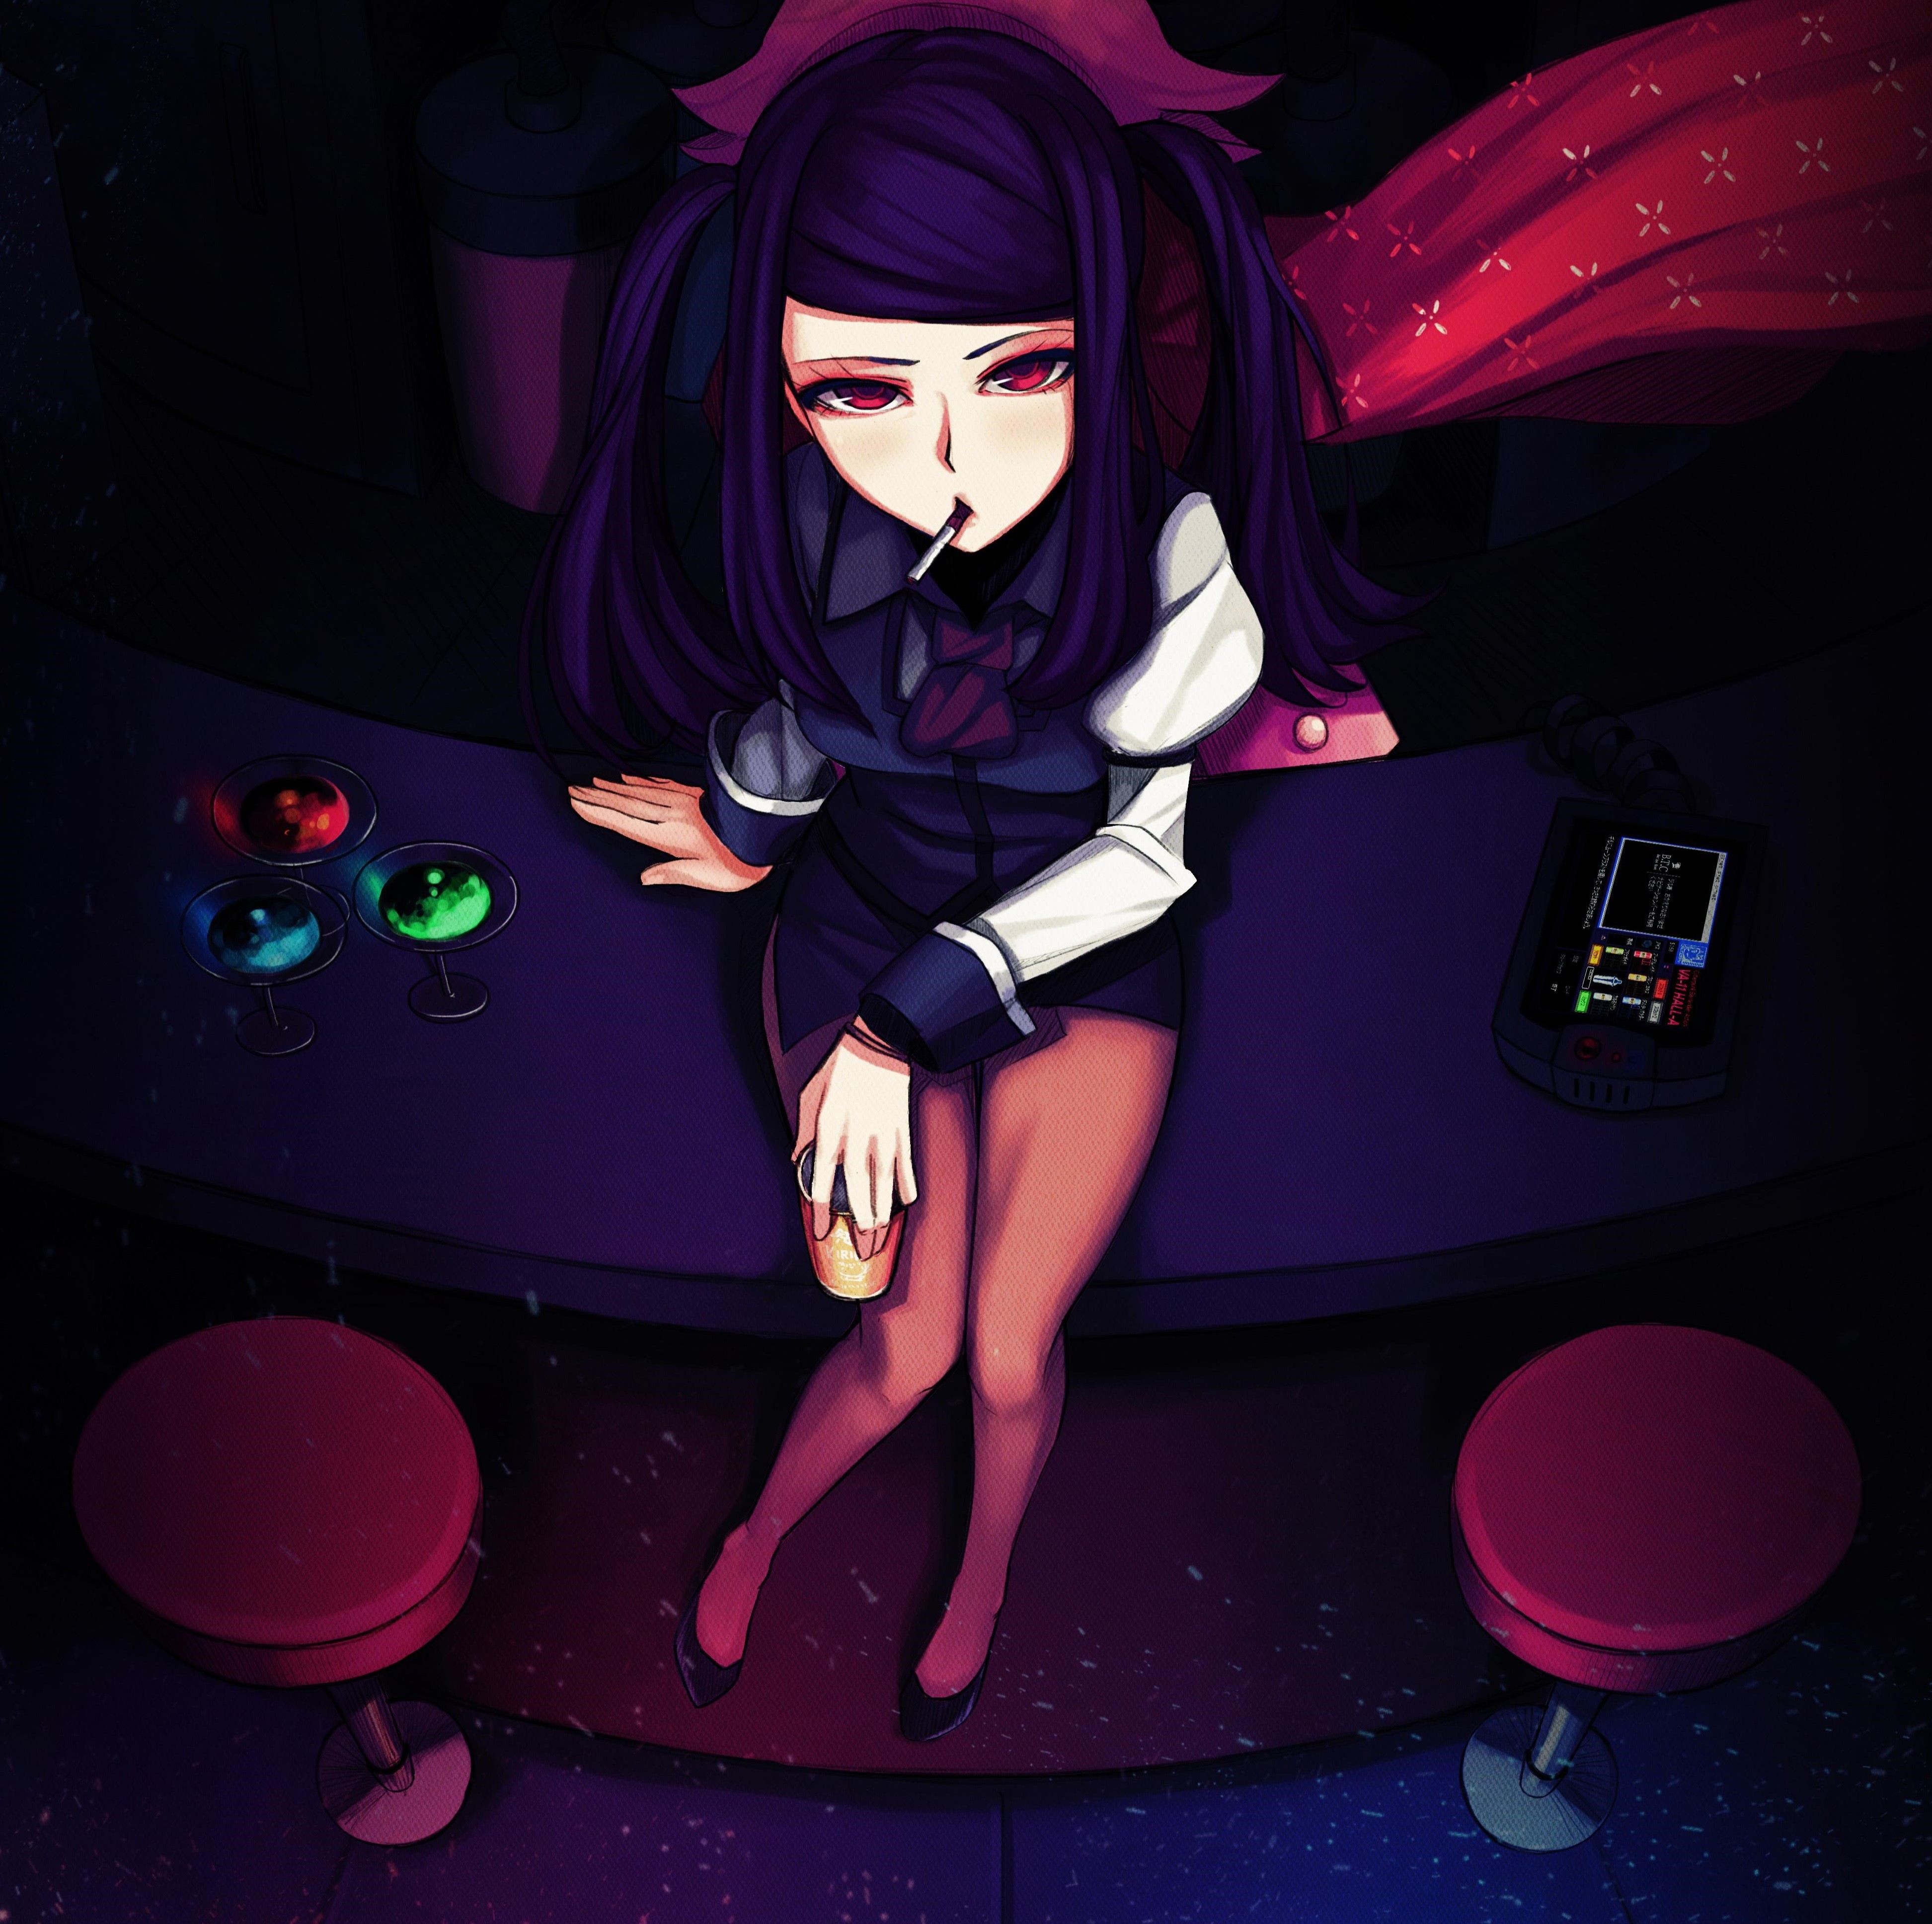 General 3889x3873 indie games Va-11 Hall-A Julianne Stingray purple hair twintails cigarettes cup knees together red eyes looking at viewer video games PC gaming women video game girls thighs legs sitting skirt